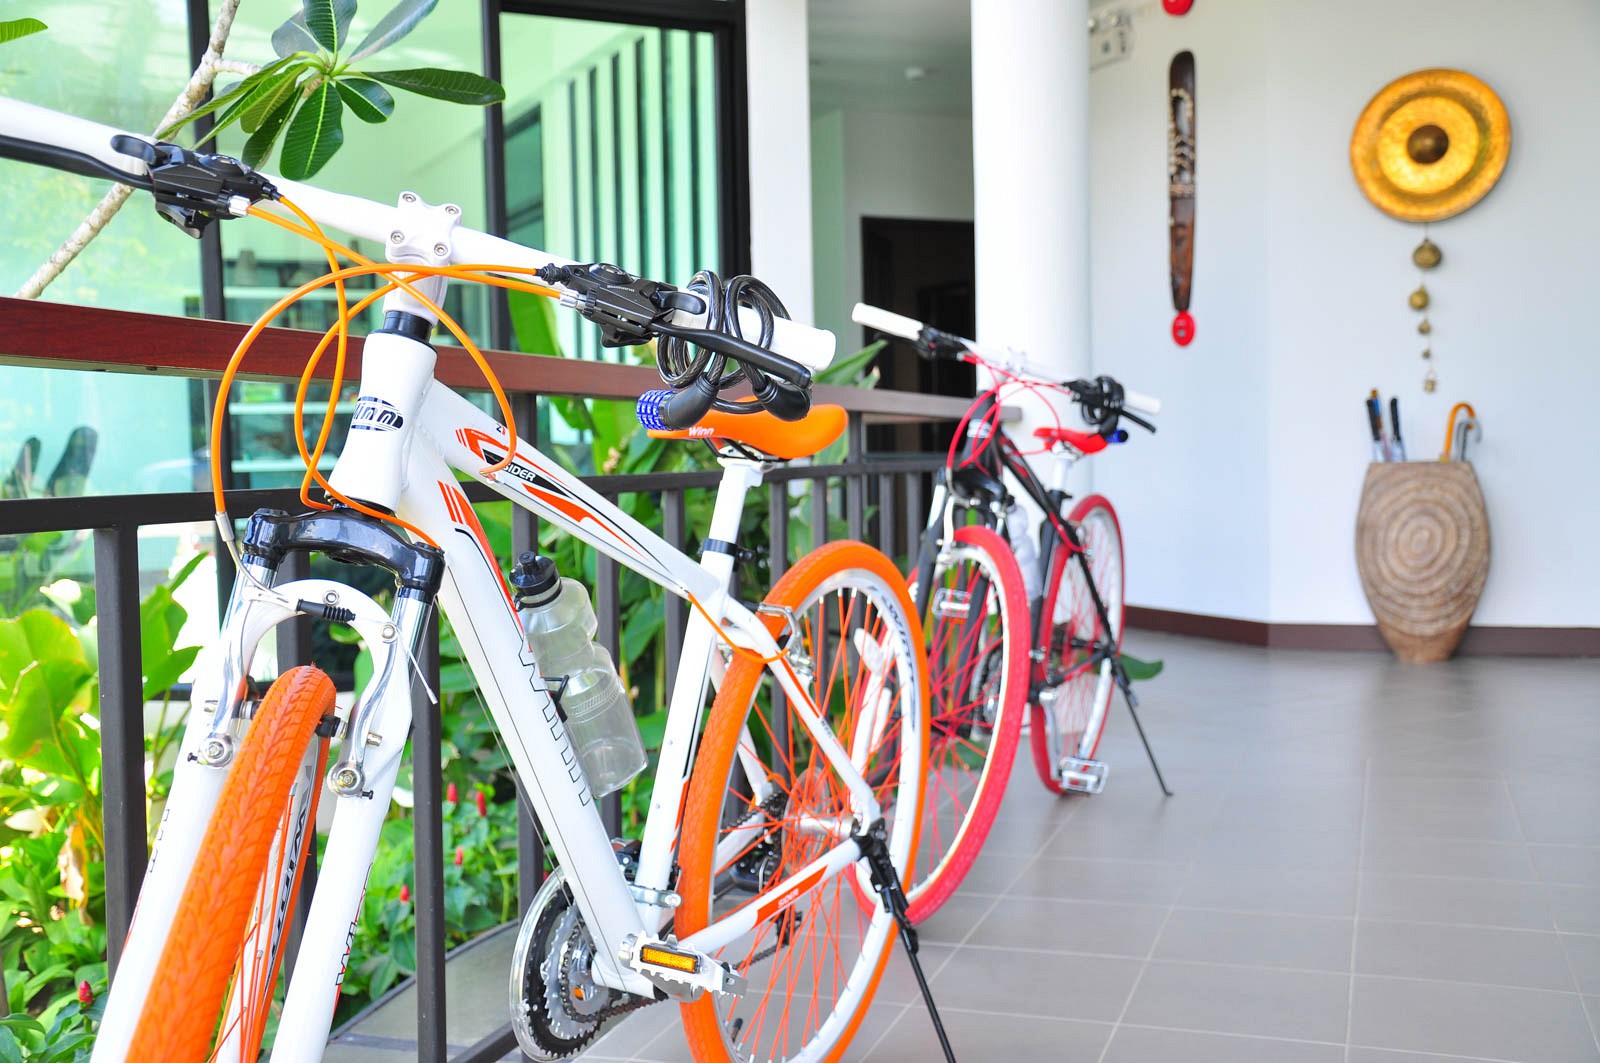 Free bicycle rental & Fitness